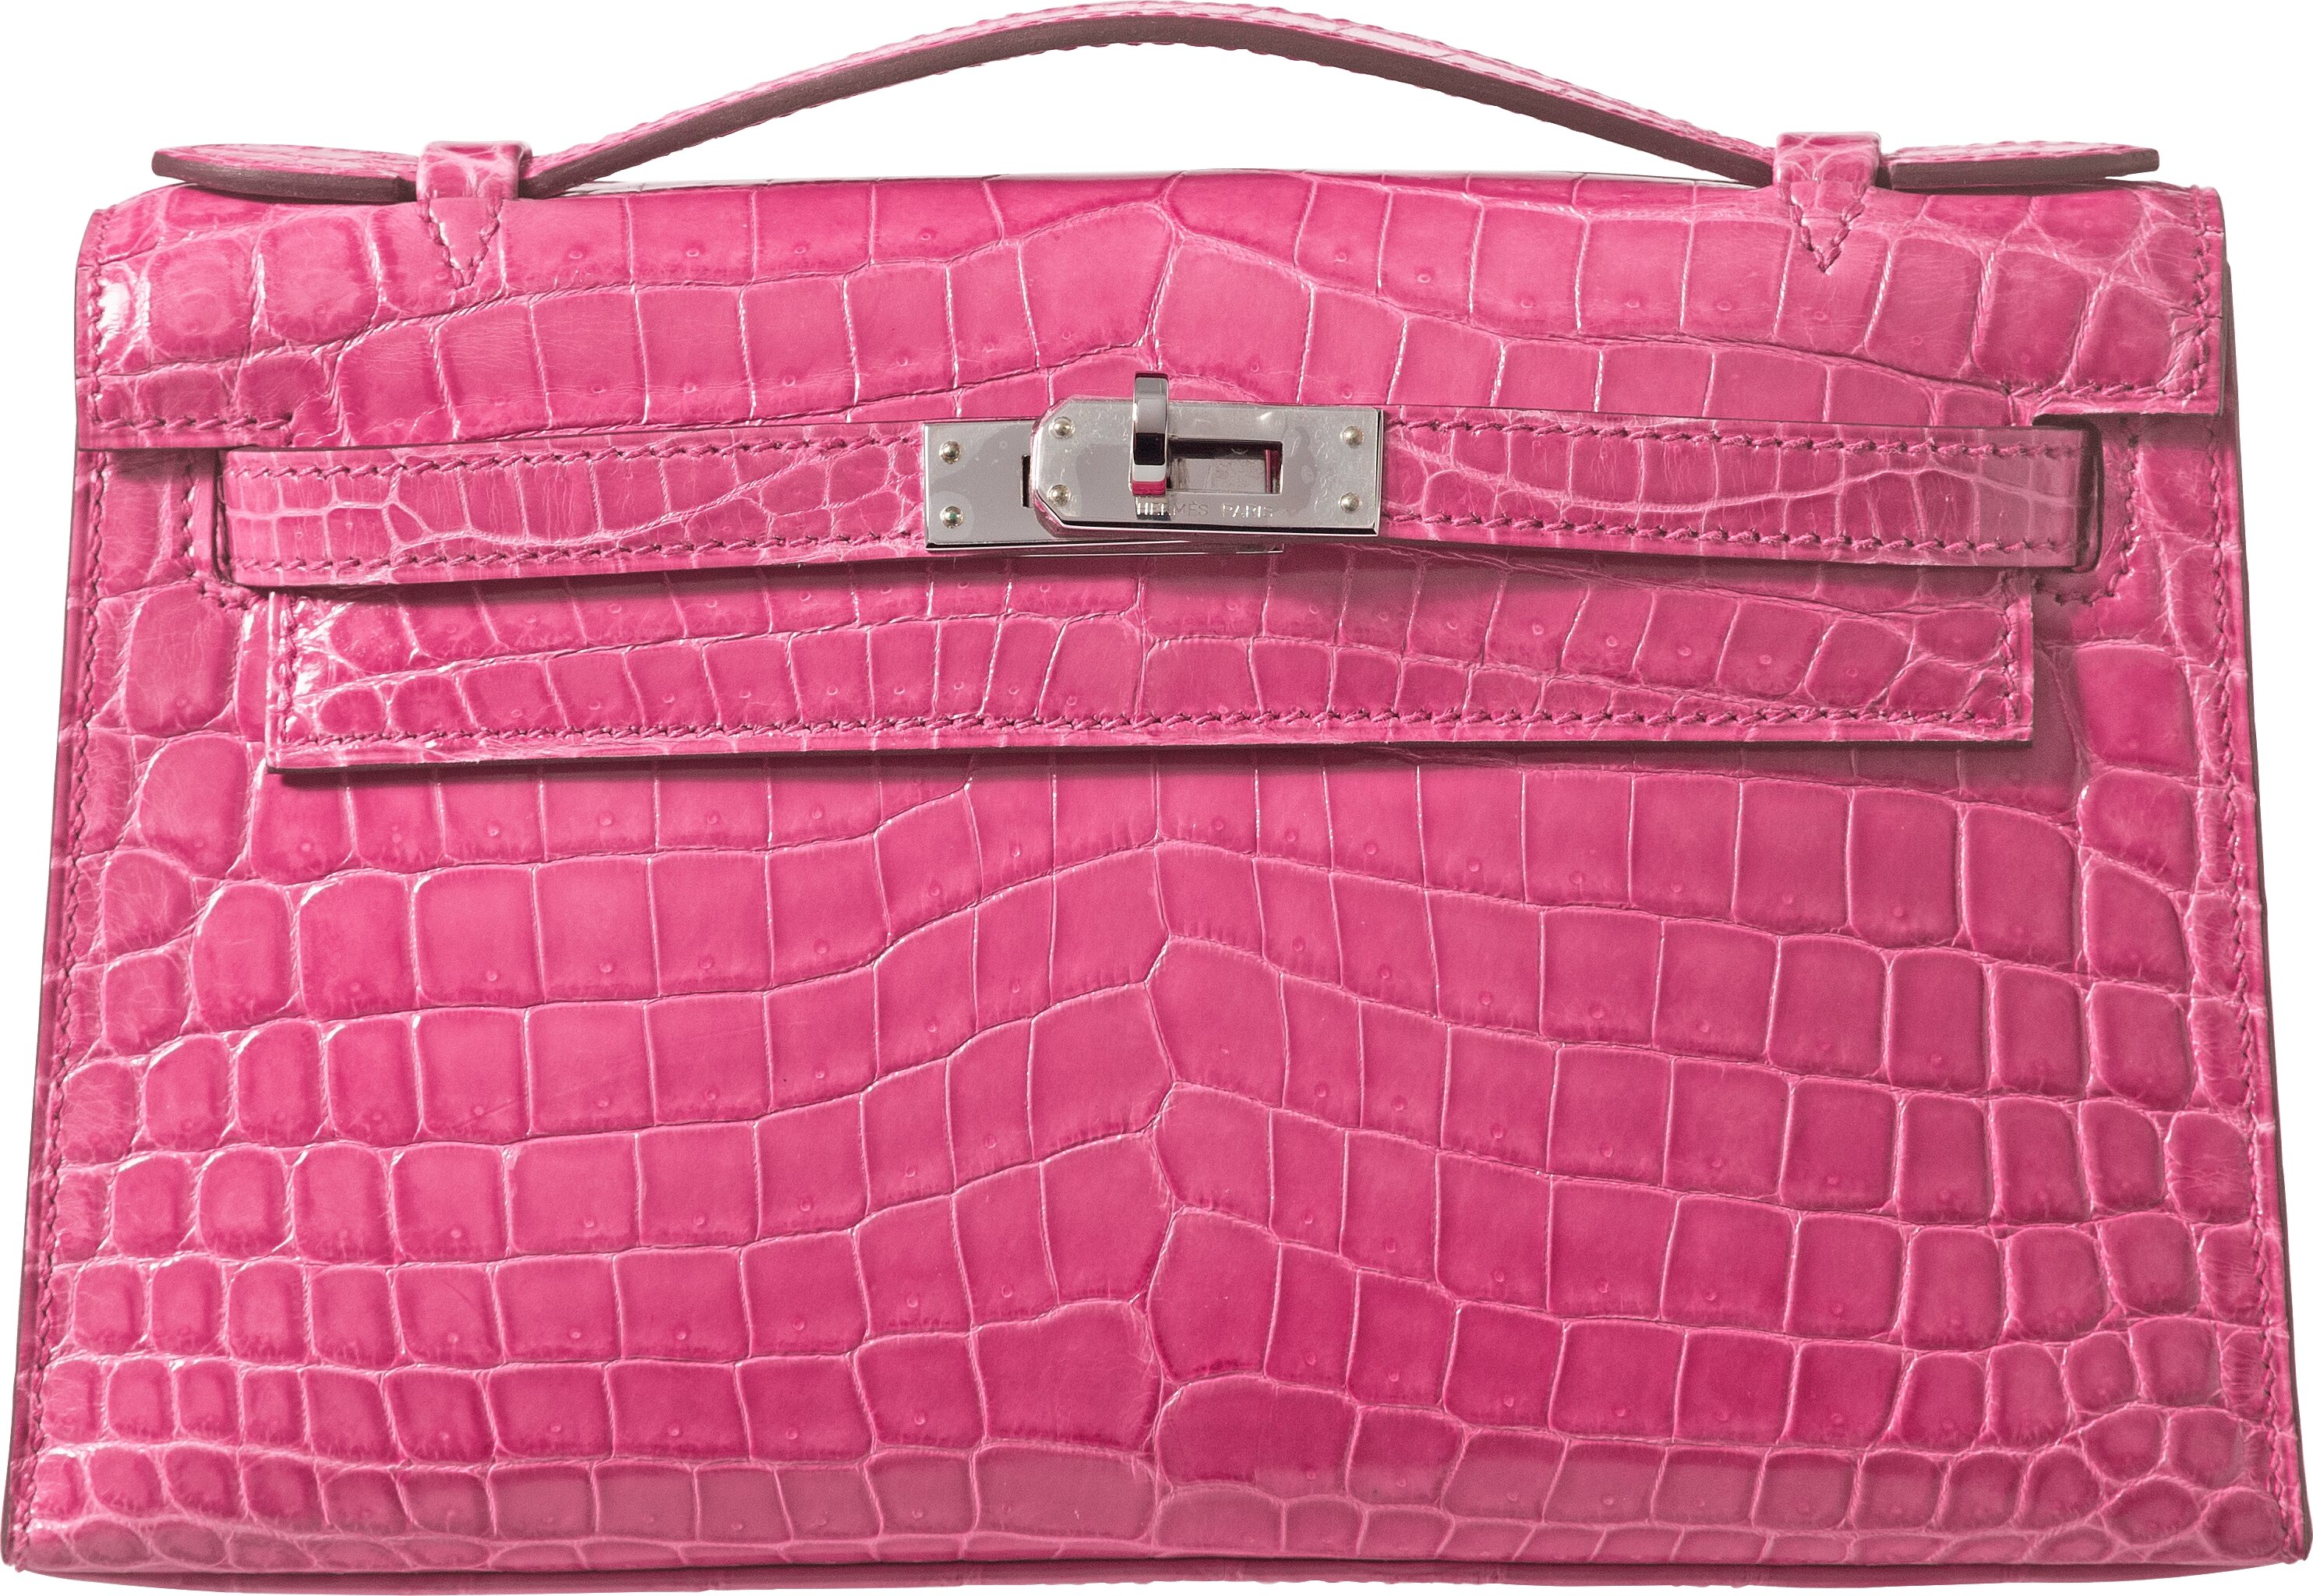 Sold at Auction: Hermes Fuchsia Pink Swift Leather Kelly Cut Pochette